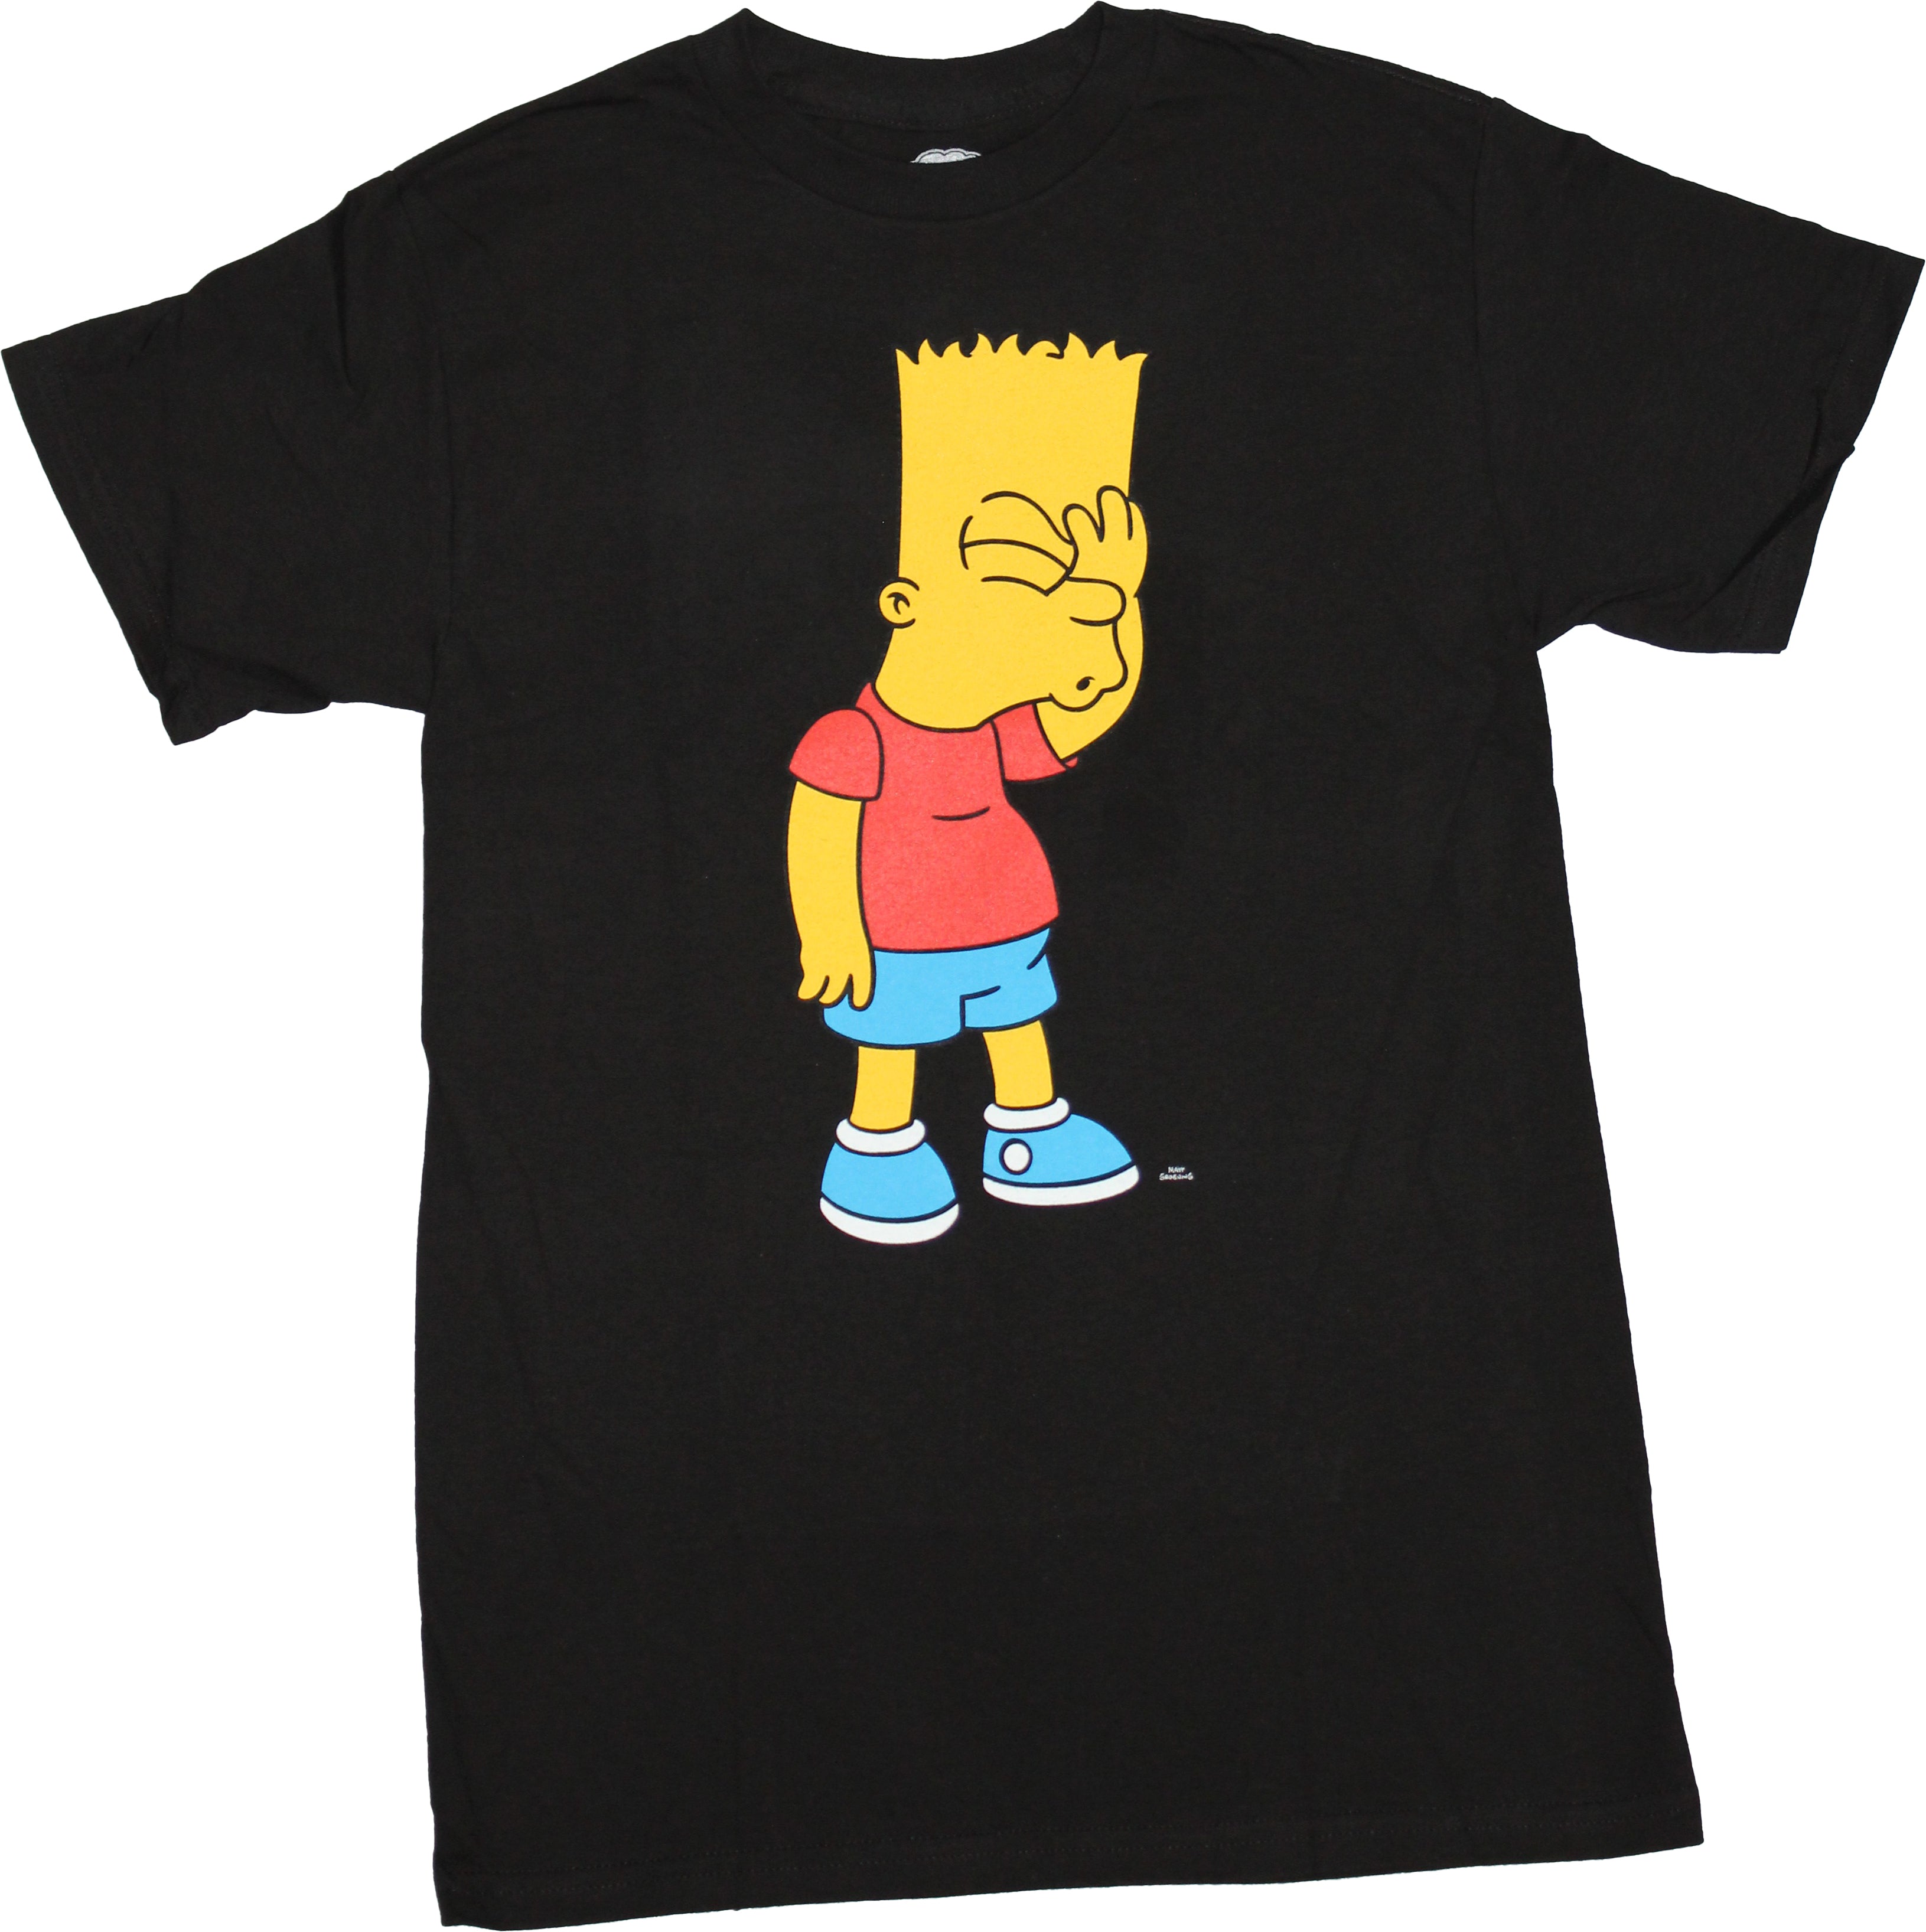 The Simpsons Mens T-Shirt - Bart Simpson Standing Doh Image